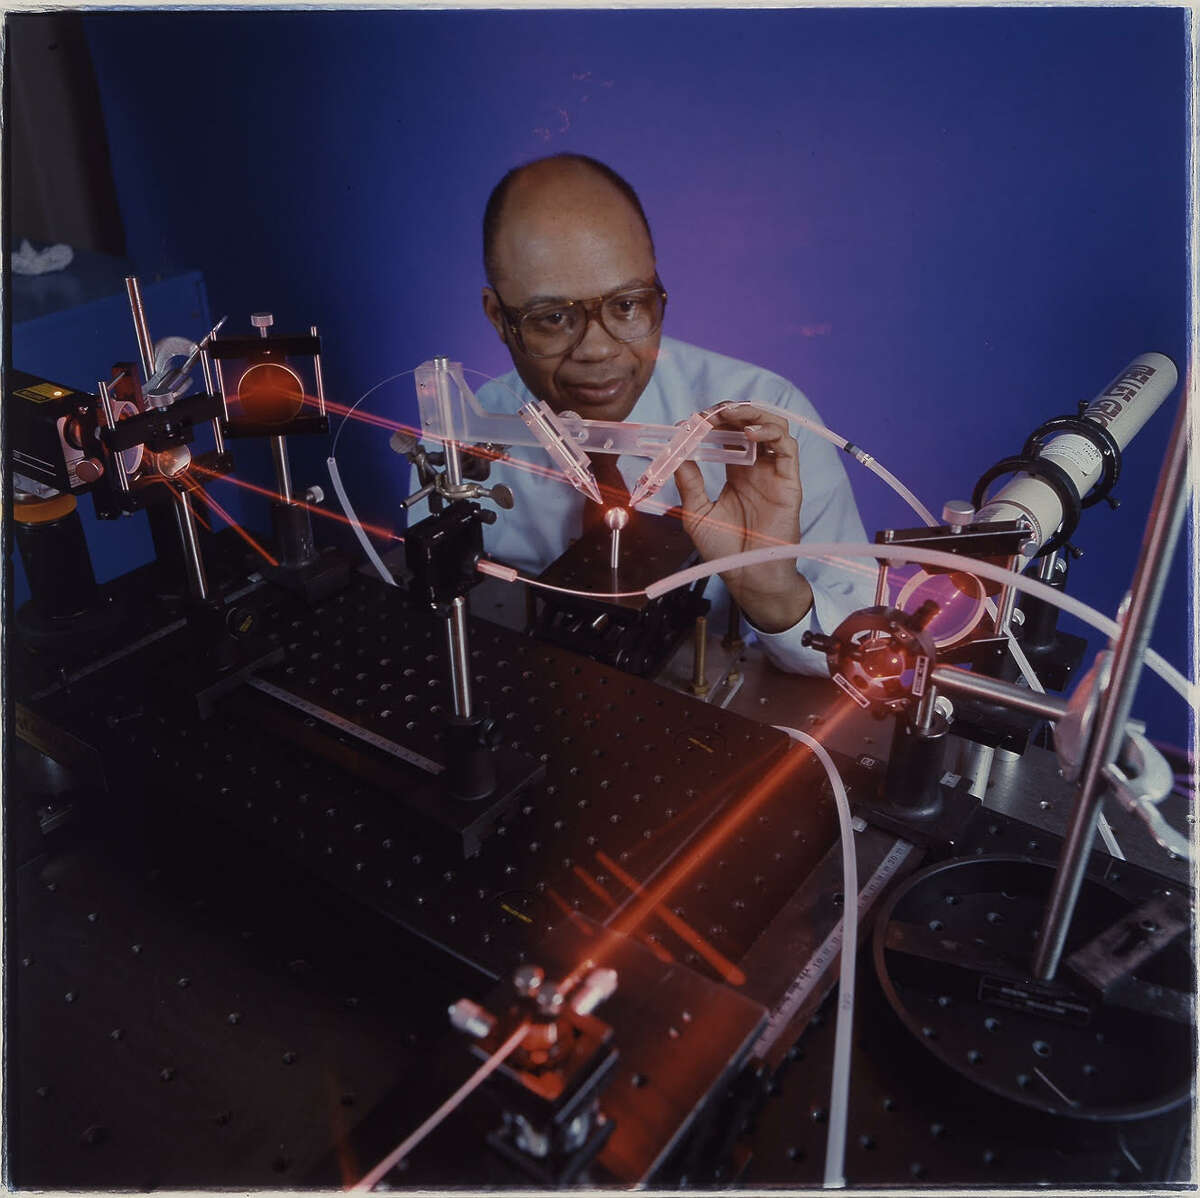 Marshall Jones, who holds 55 U.S. patents and is being inducted into the National Inventors Hall of Fame, poses with an industrial laser he used to make innovative breakthroughs in manufacturing. (Photo courtesy of General Electric)